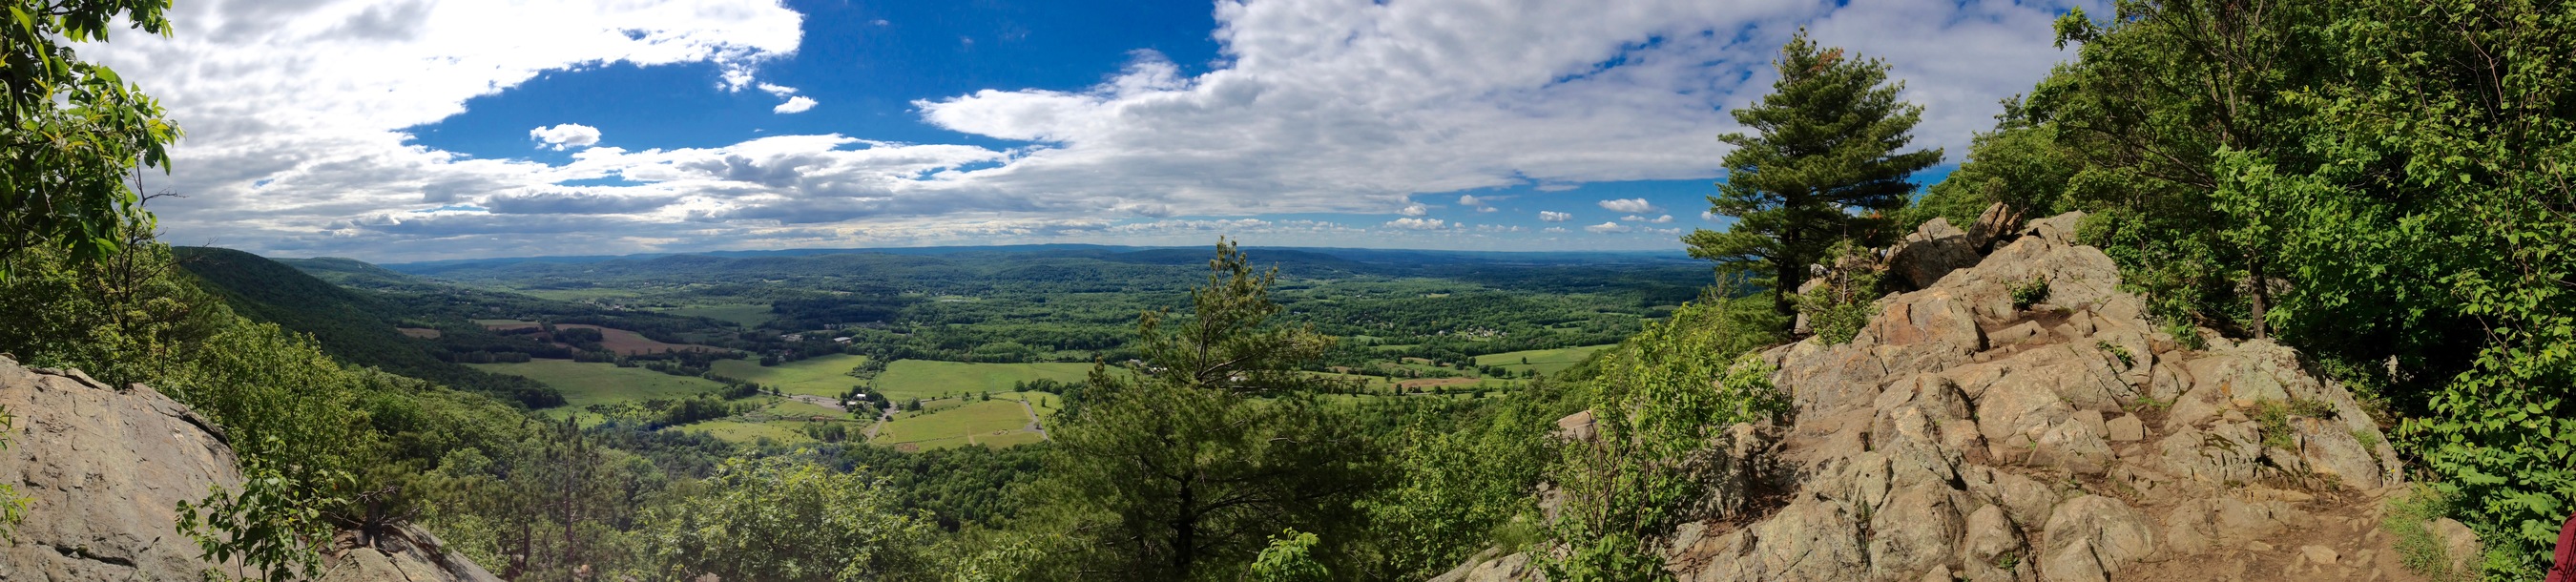 A view of the Vernon valley from Wawayanda Mountain.